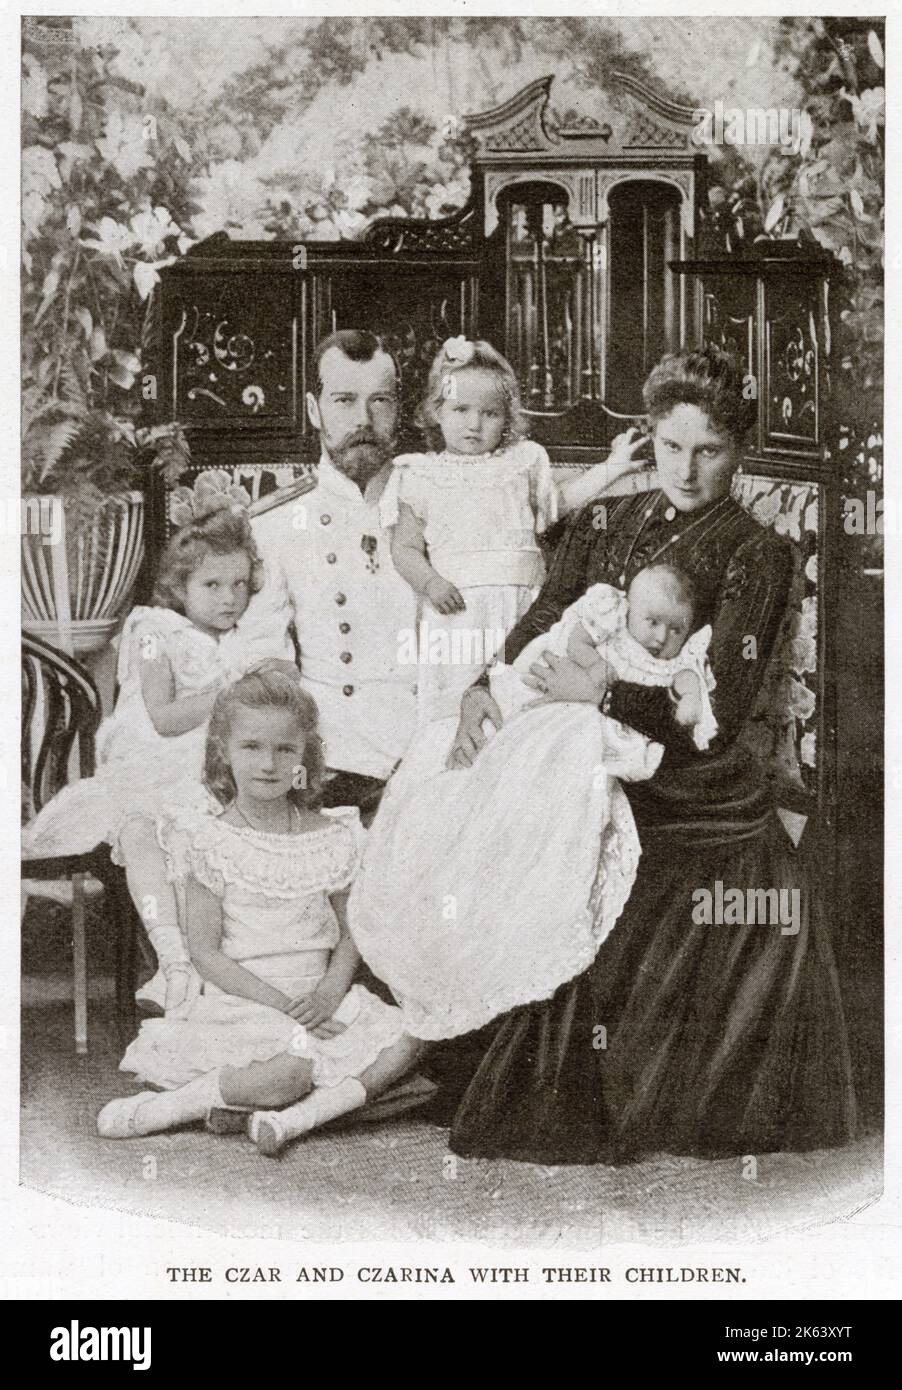 Nicholas II of Russia (1868 - 1918), the last Emperor of Russia, ruling from 1 November 1894 until his forced abdication on 15 March 1917 with his wife Alexandra Feodorovna and their four children: The Grand Duchess Olga (sitting on floor), the Grand Duchess Tatiana (left), the Grand Duchess Marie (middle) and four month old baby Grand Duchess Anastasia.      Date: 1901 Stock Photo